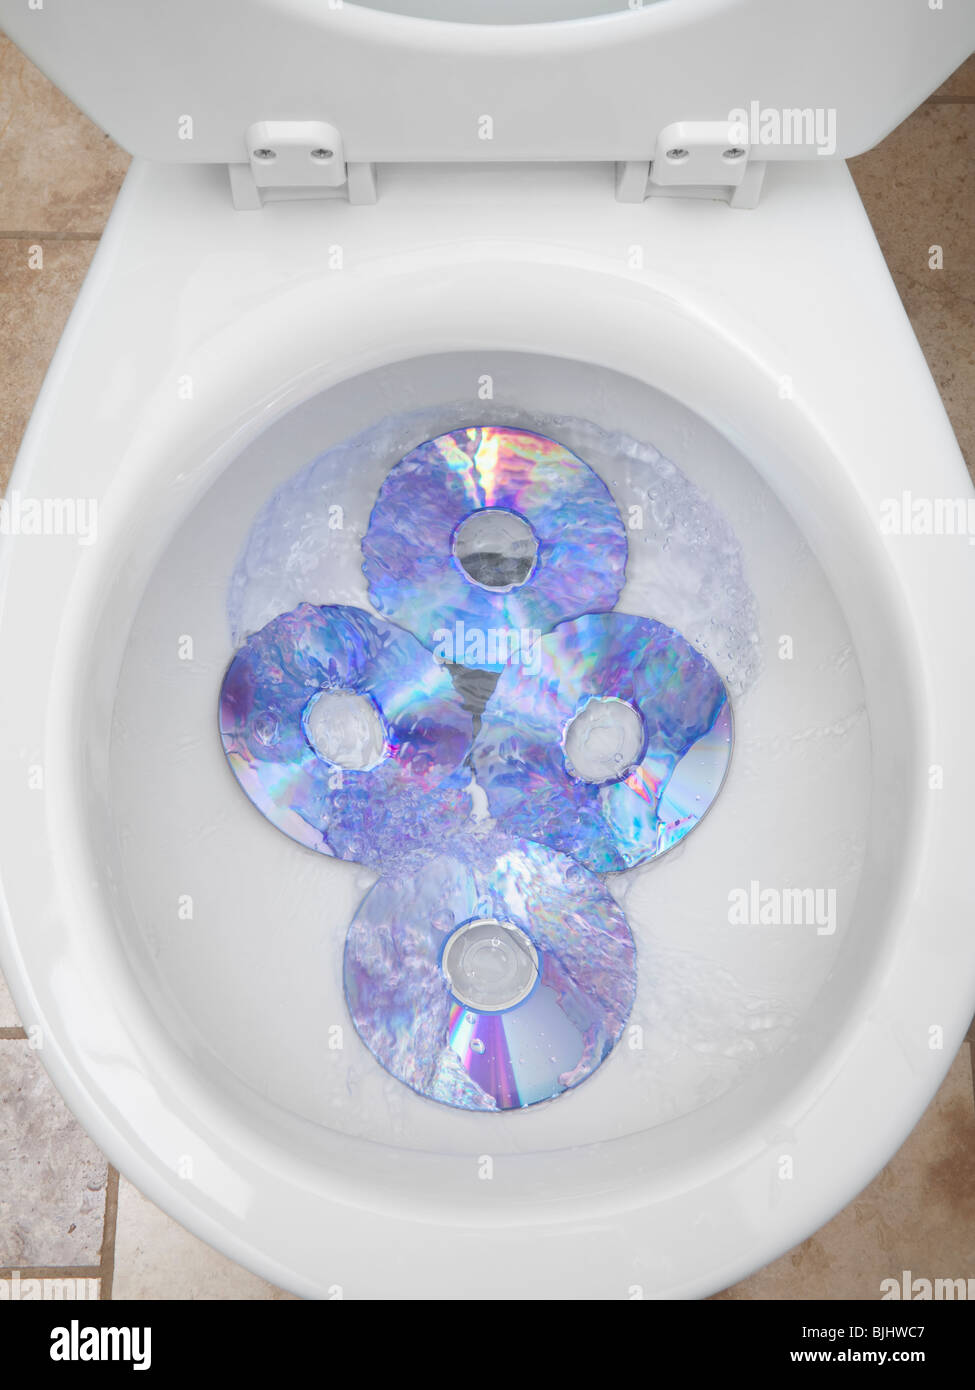 CD's in a toilet bowl Stock Photo